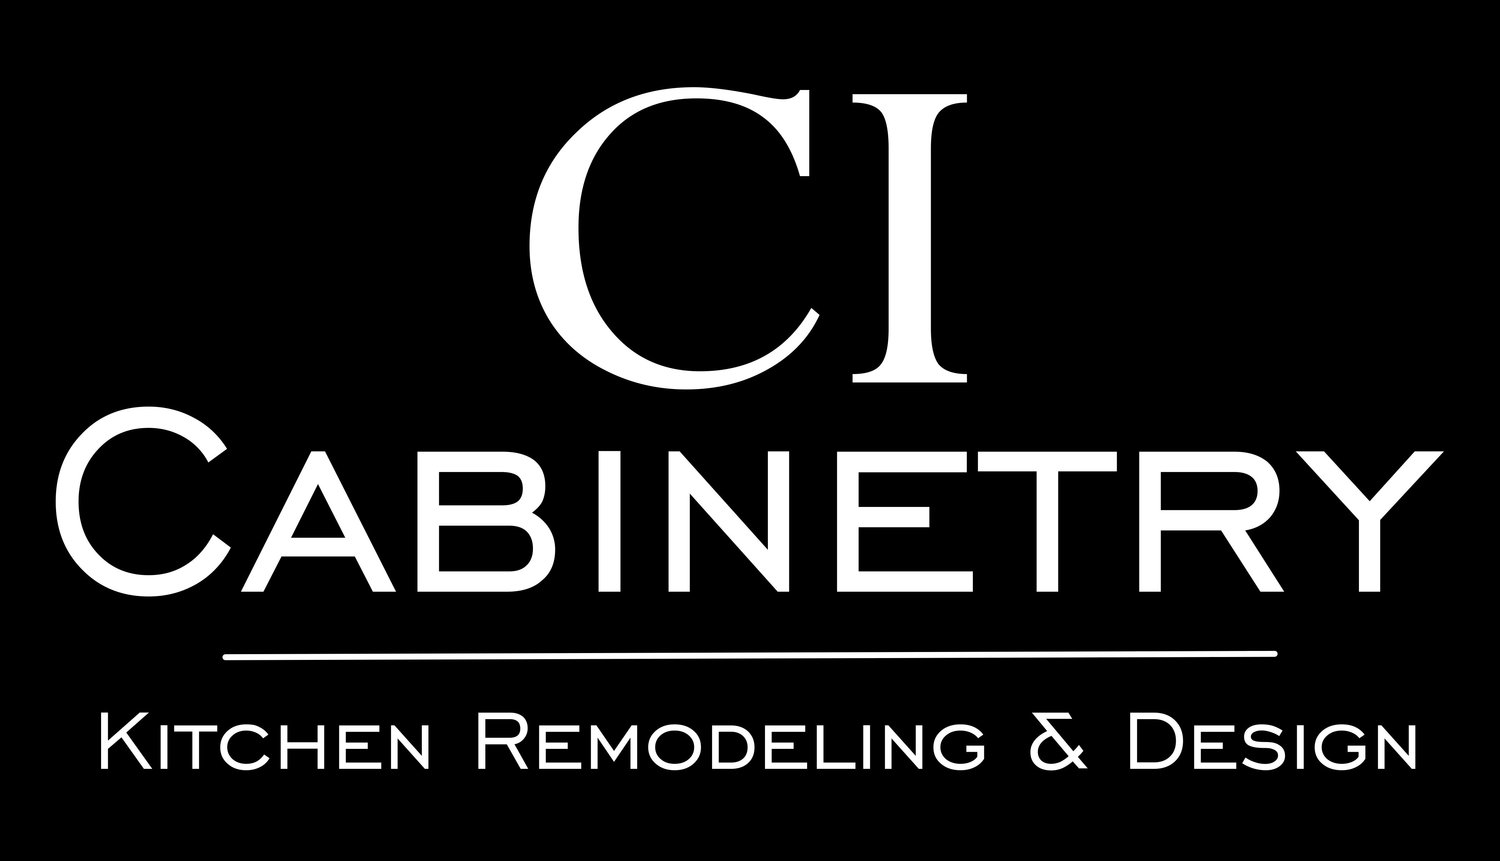 CI Cabinetry-Cabinetry, Kitchen Remodeling, Design & Interiors